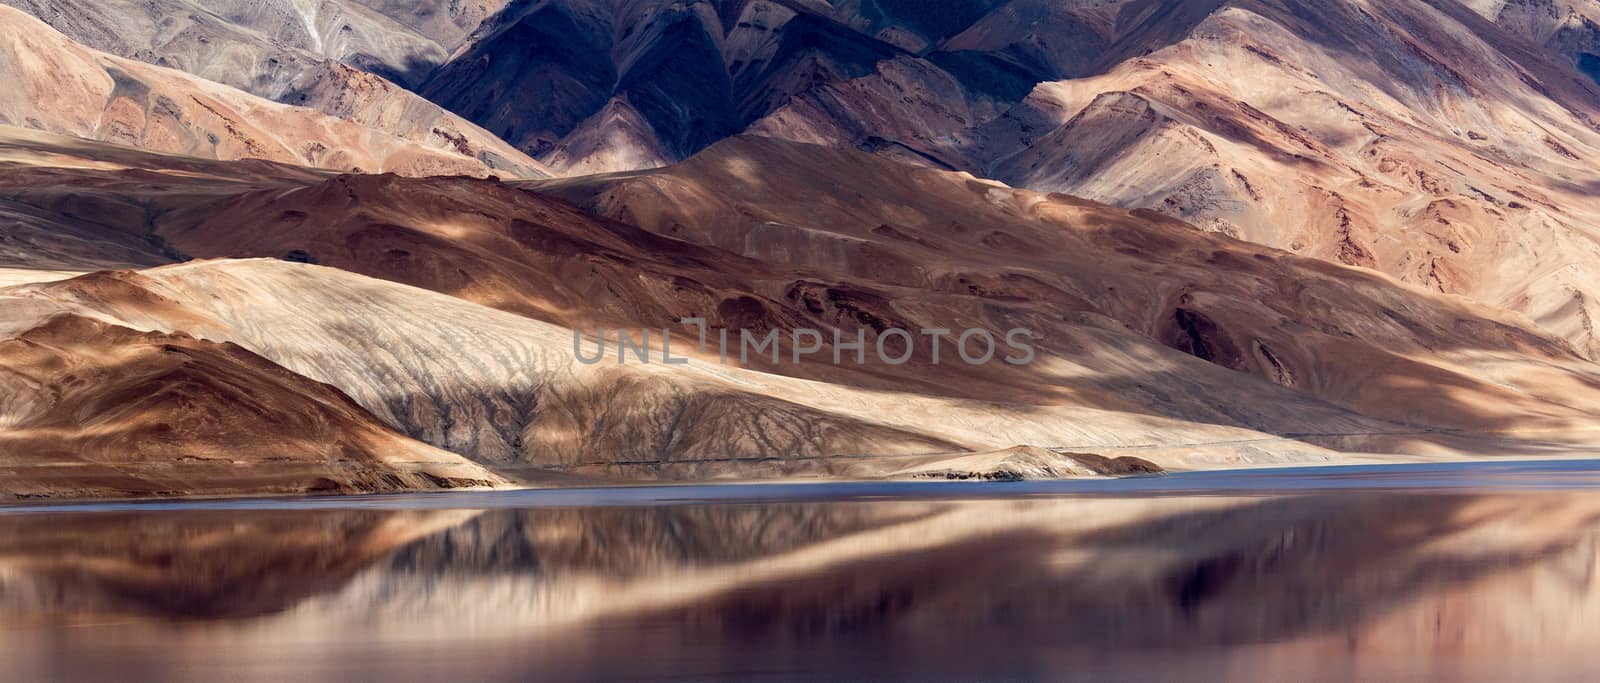 Tsomoriri mountain lake with fantastic mountains background and reflections in the lake (north India)